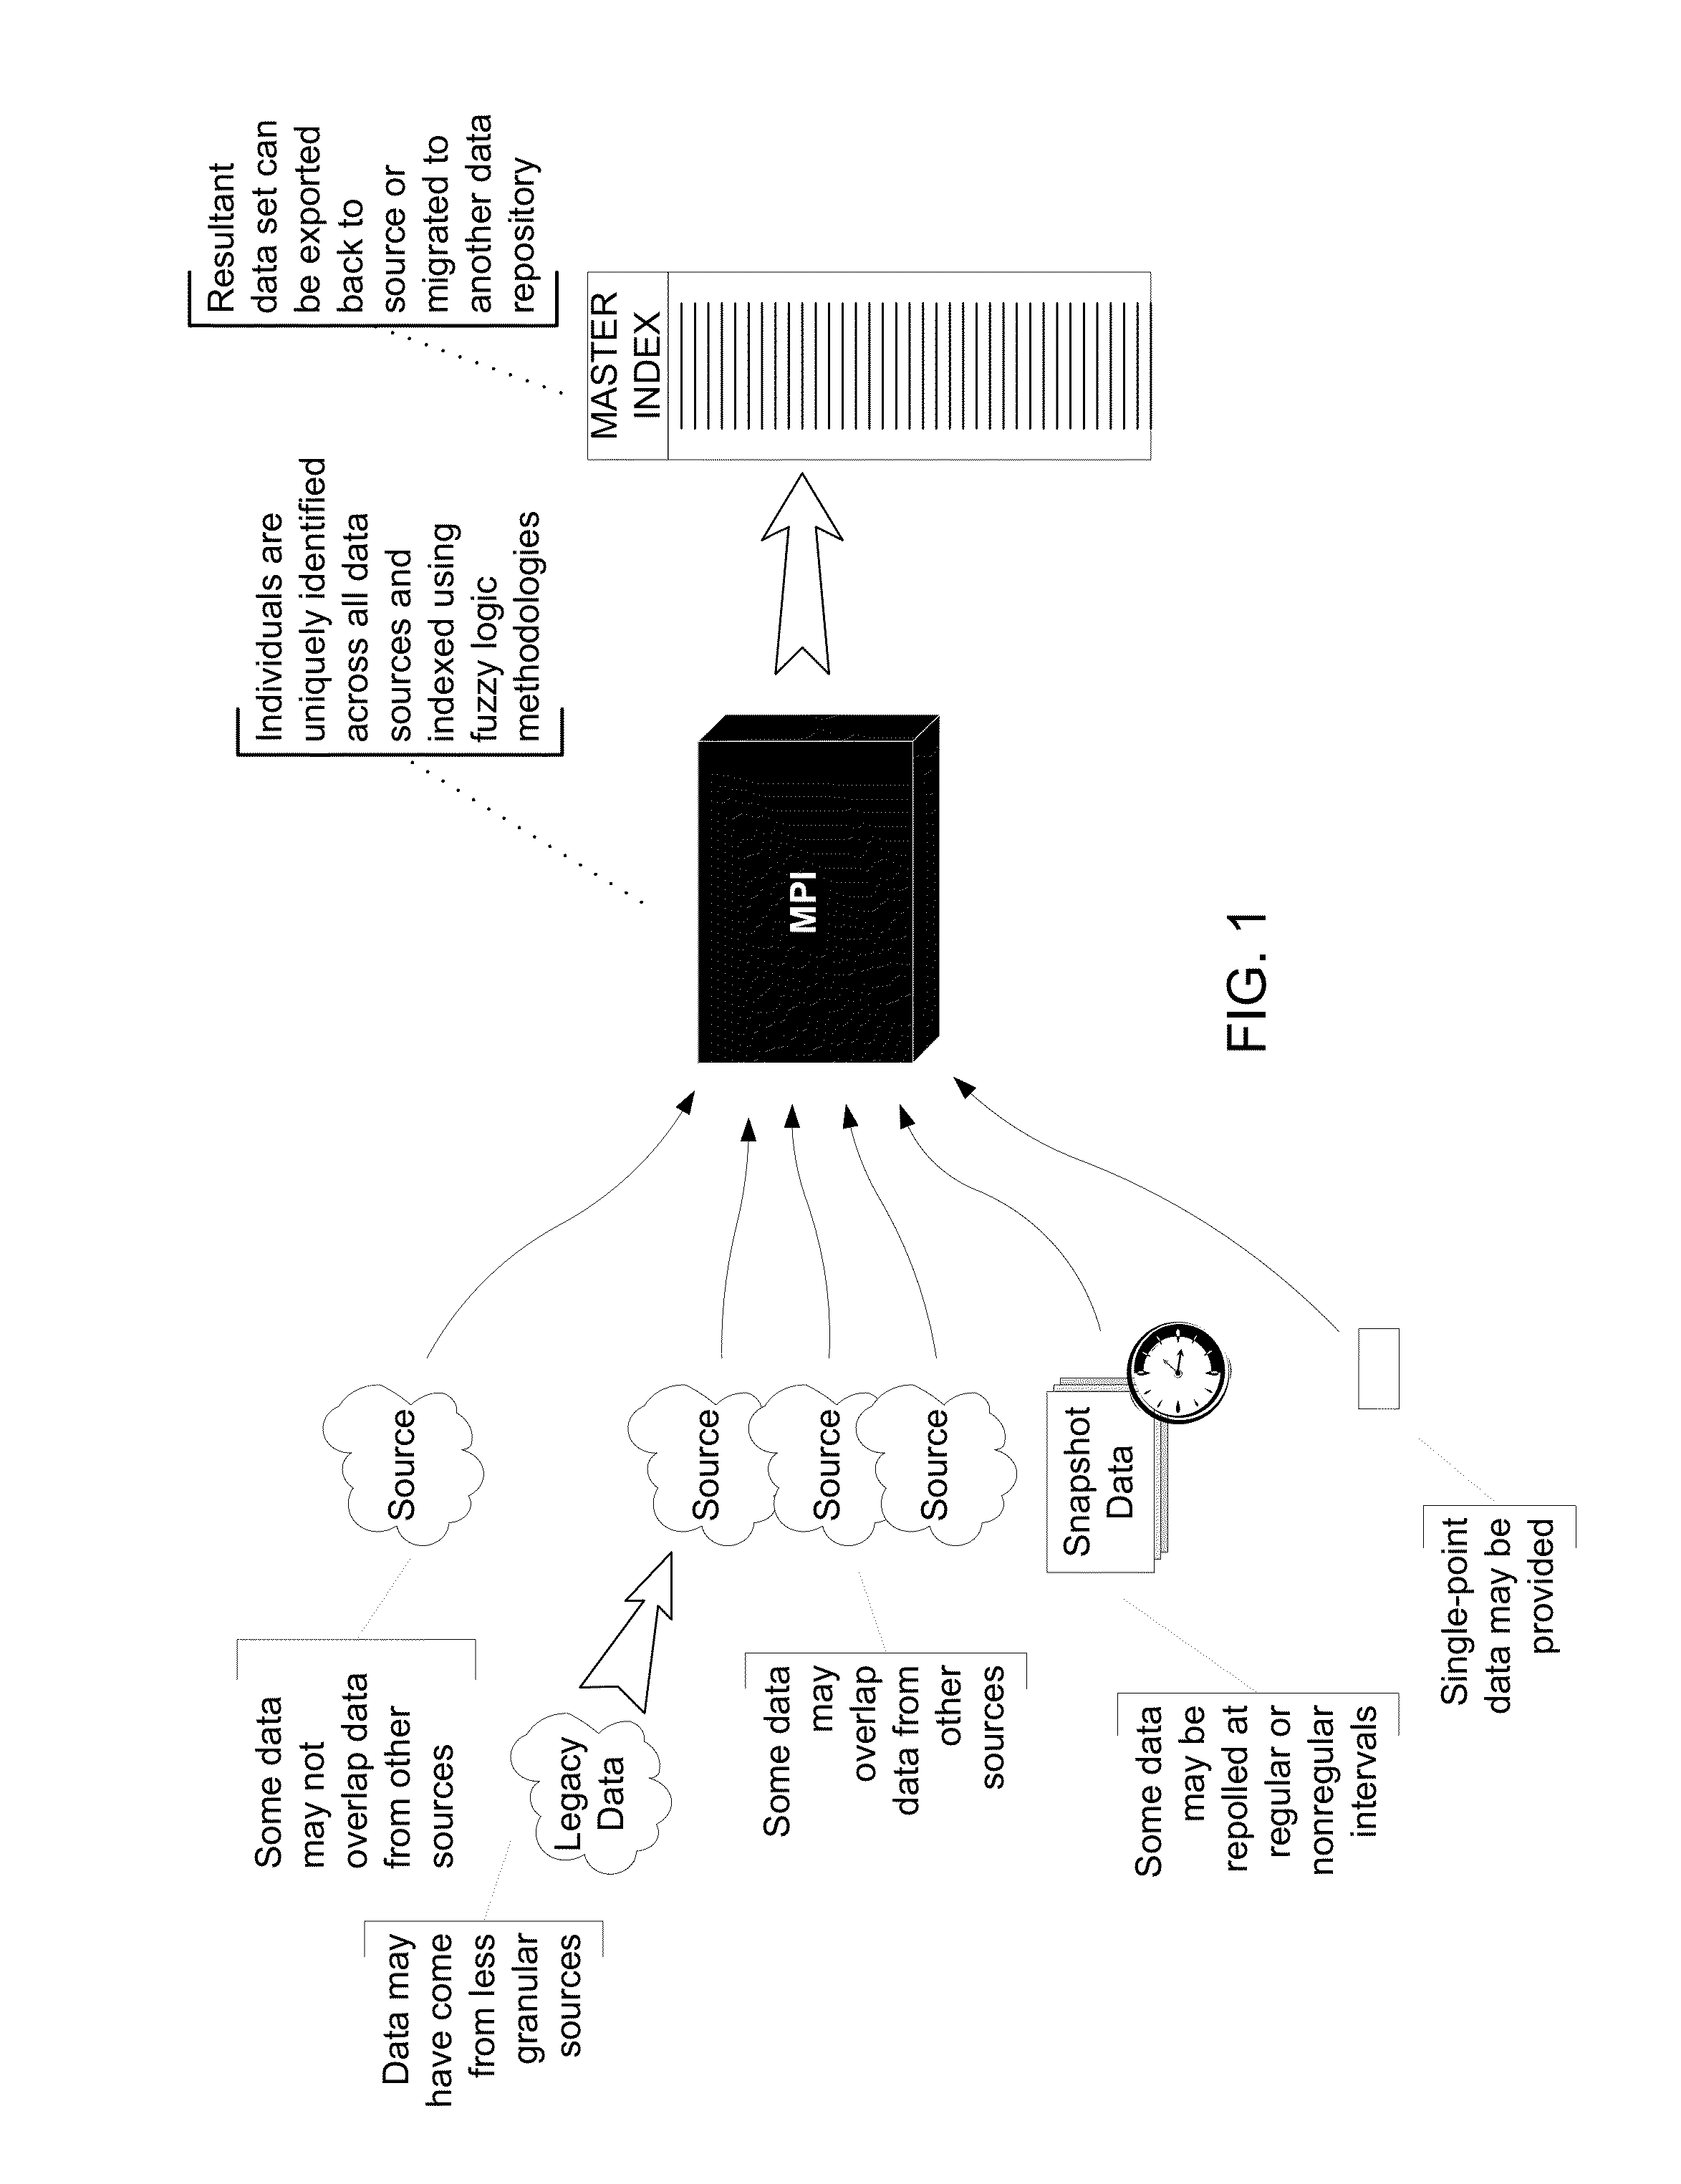 System and process for record duplication analysis